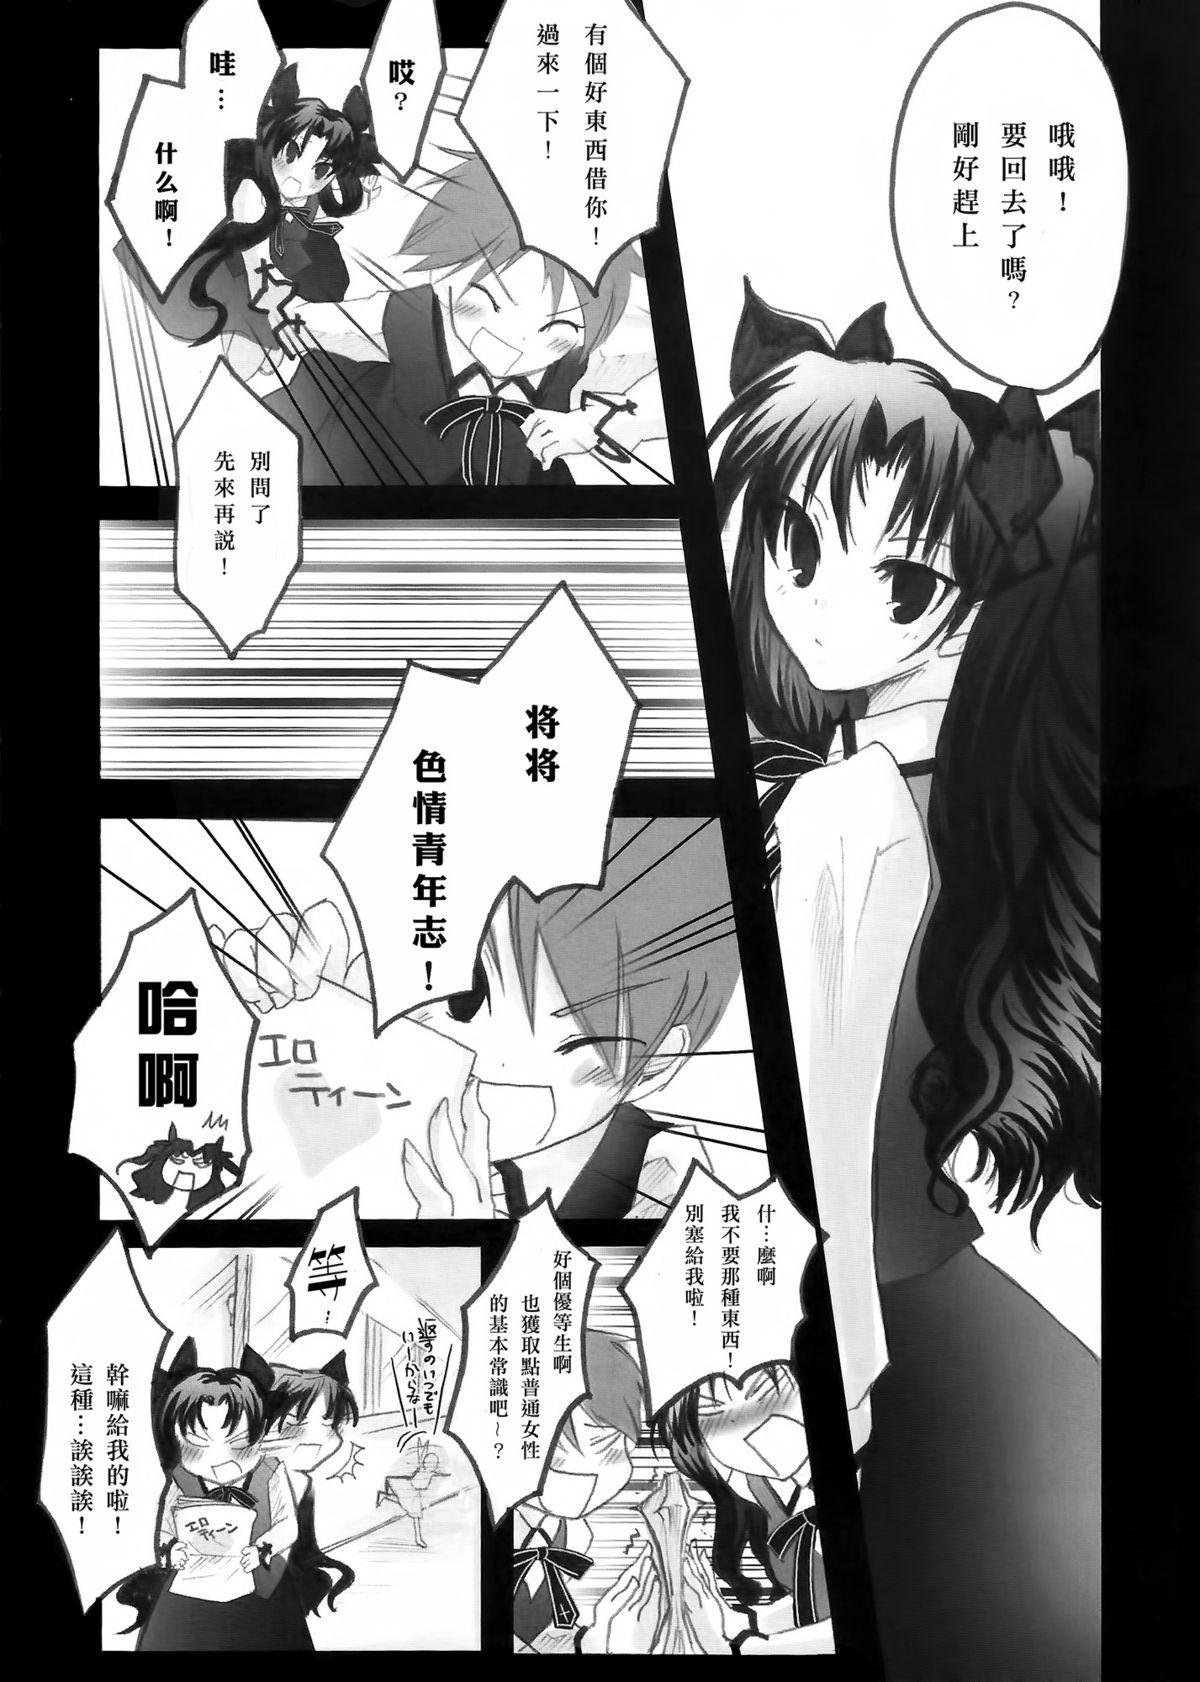 Soles Himitsu Nikki 1 - Fate stay night Ass Sex - Page 6